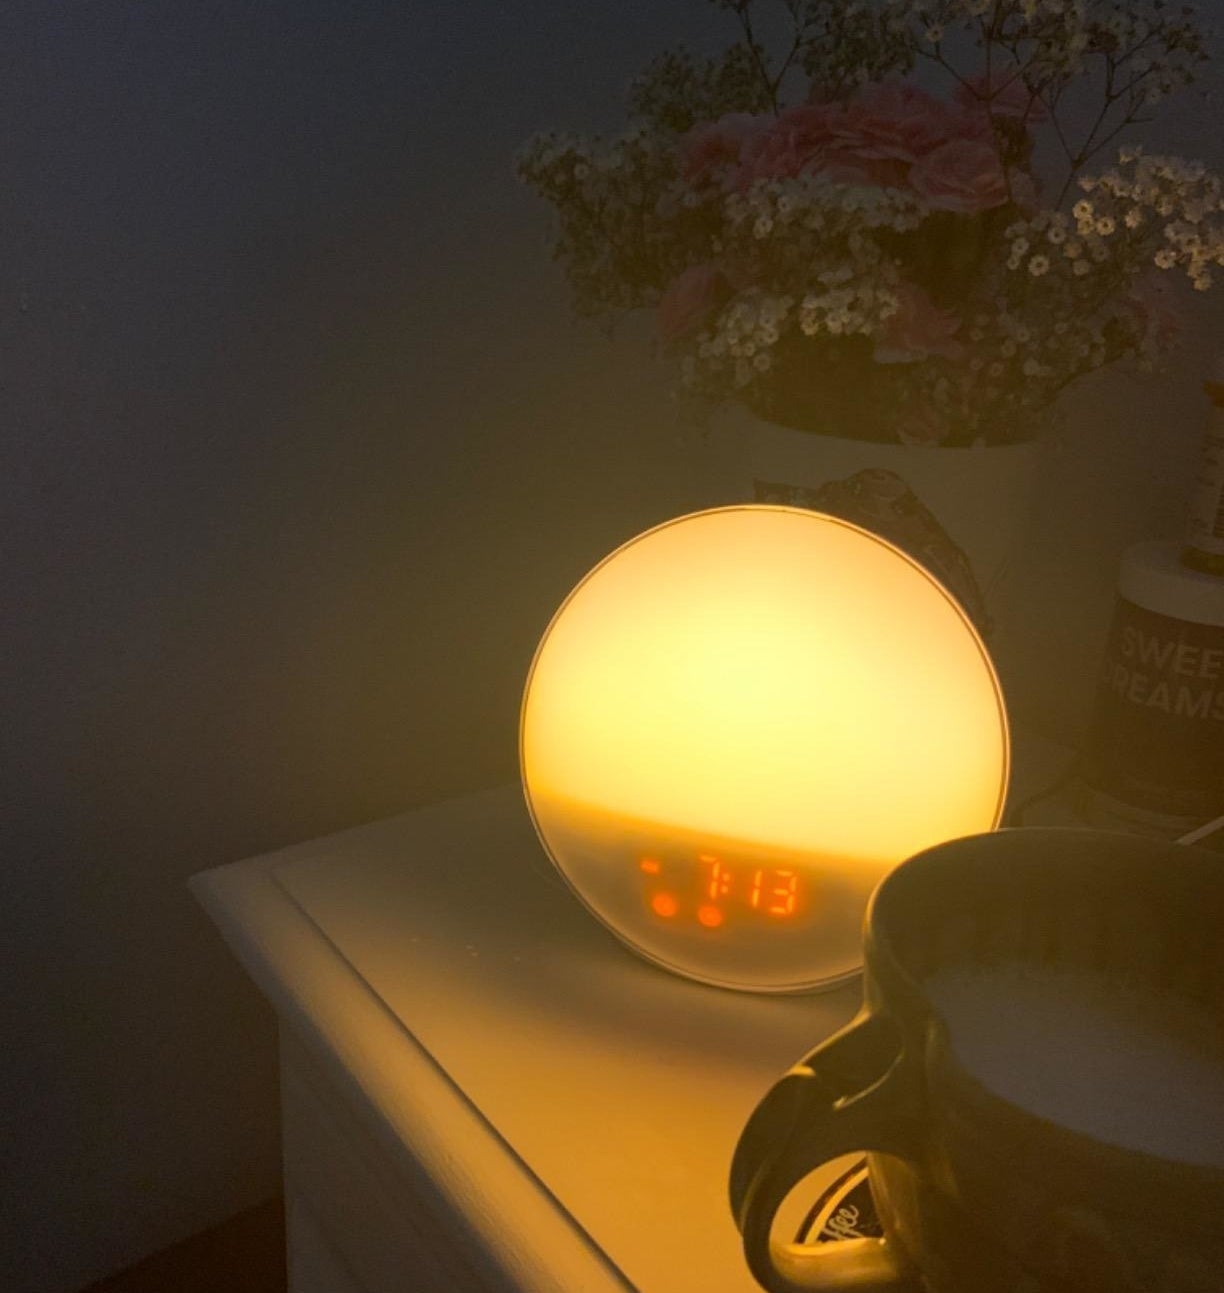 The lit up alarm clock on a nightstand